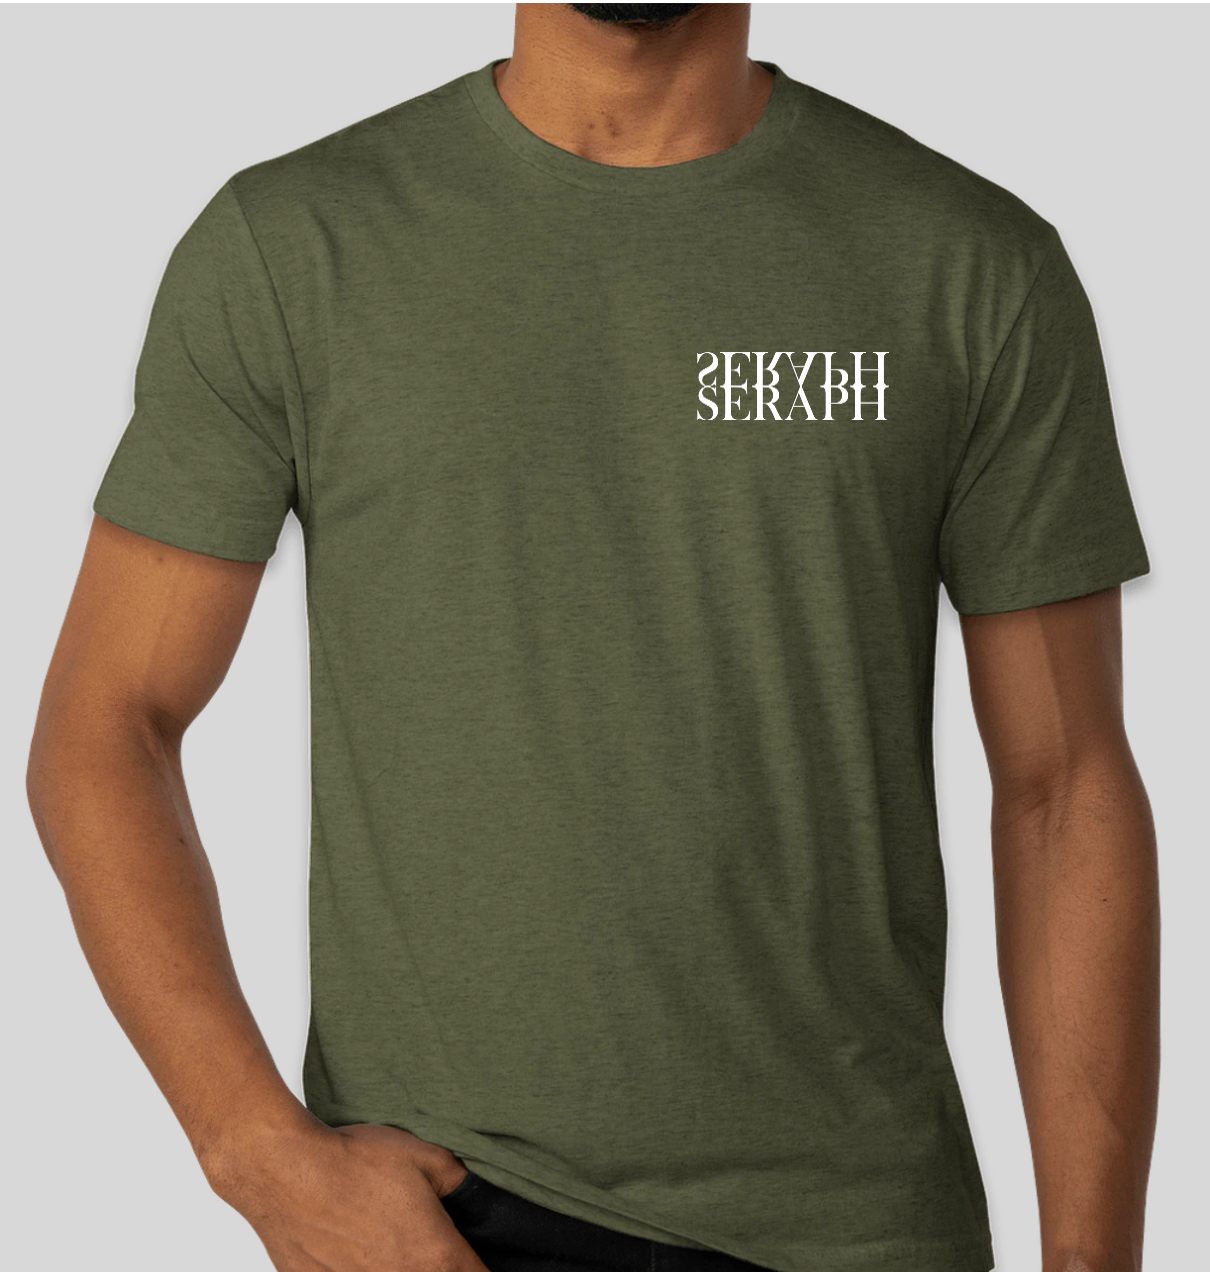 Seraph Tee (Colors Available)